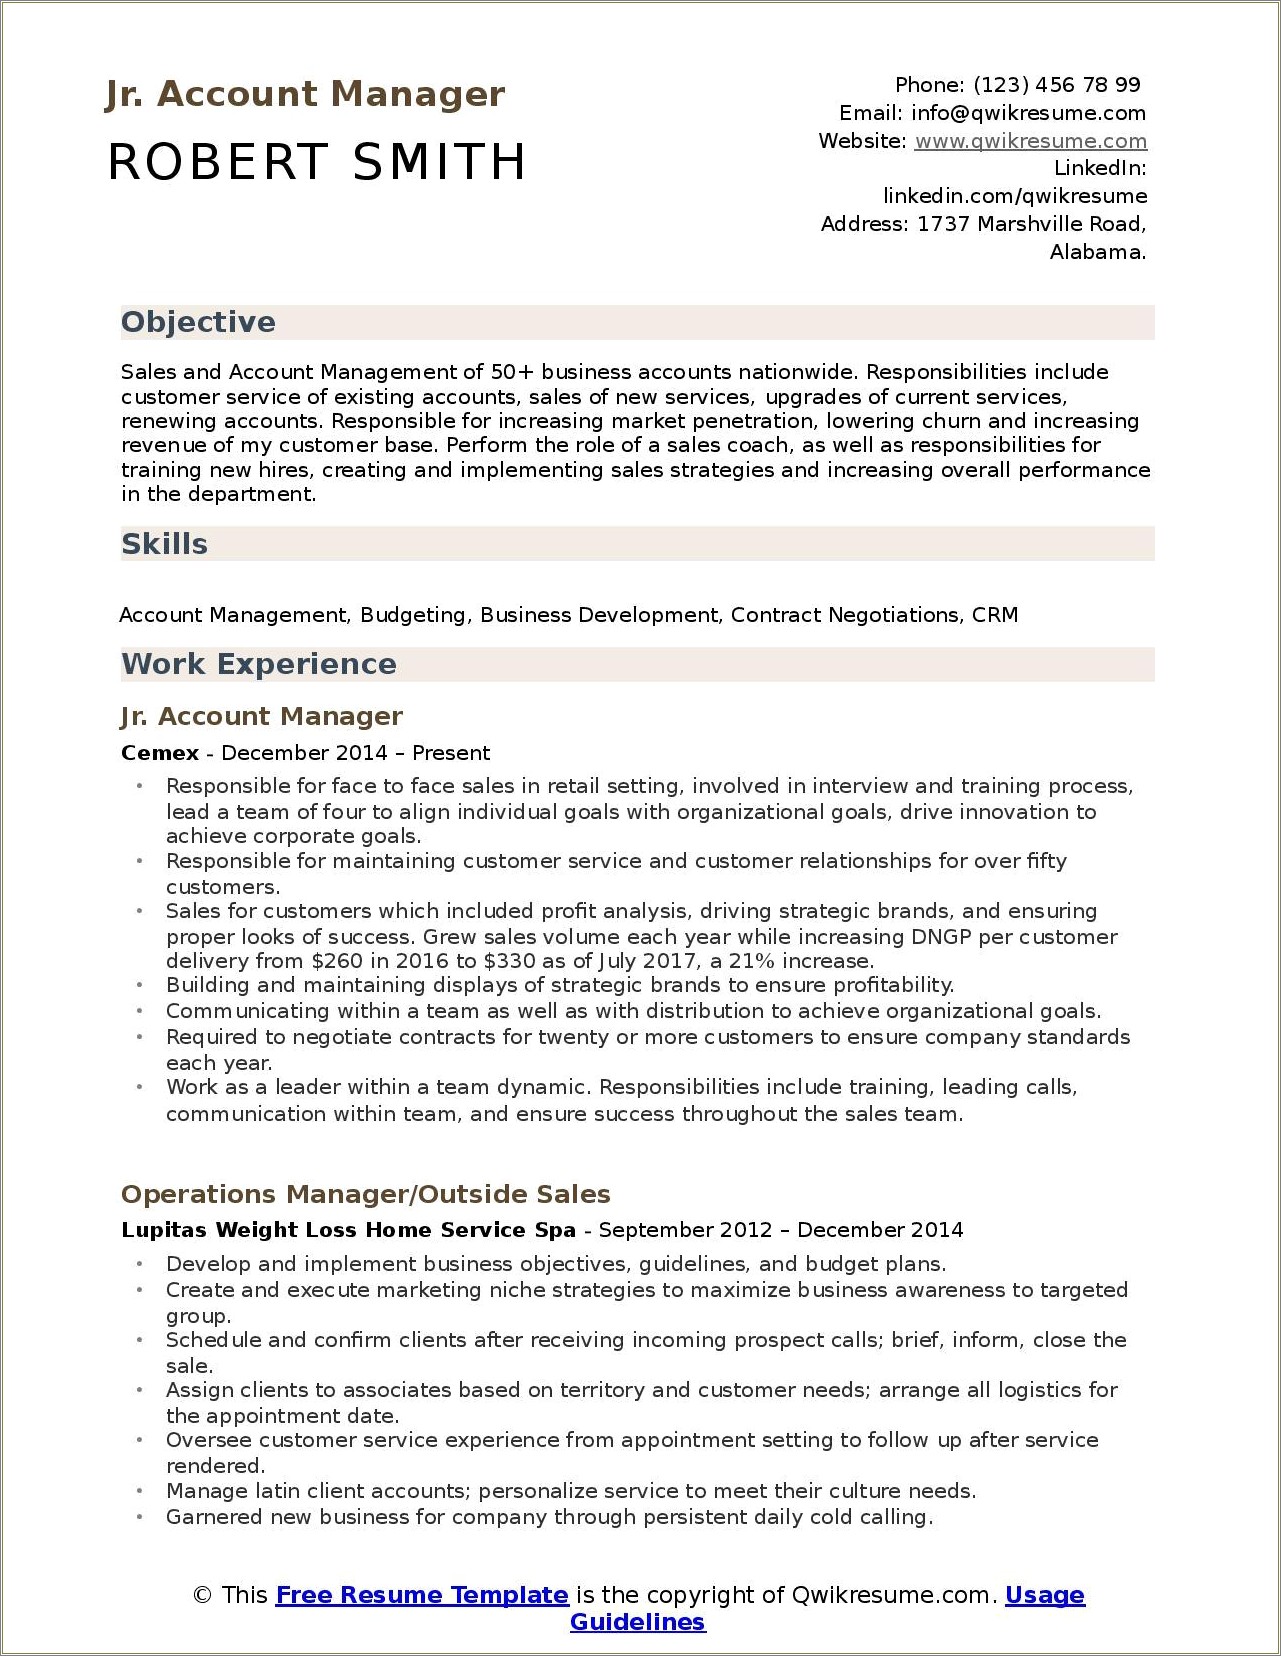 Clients Service Manager High Value Segment Sample Resume